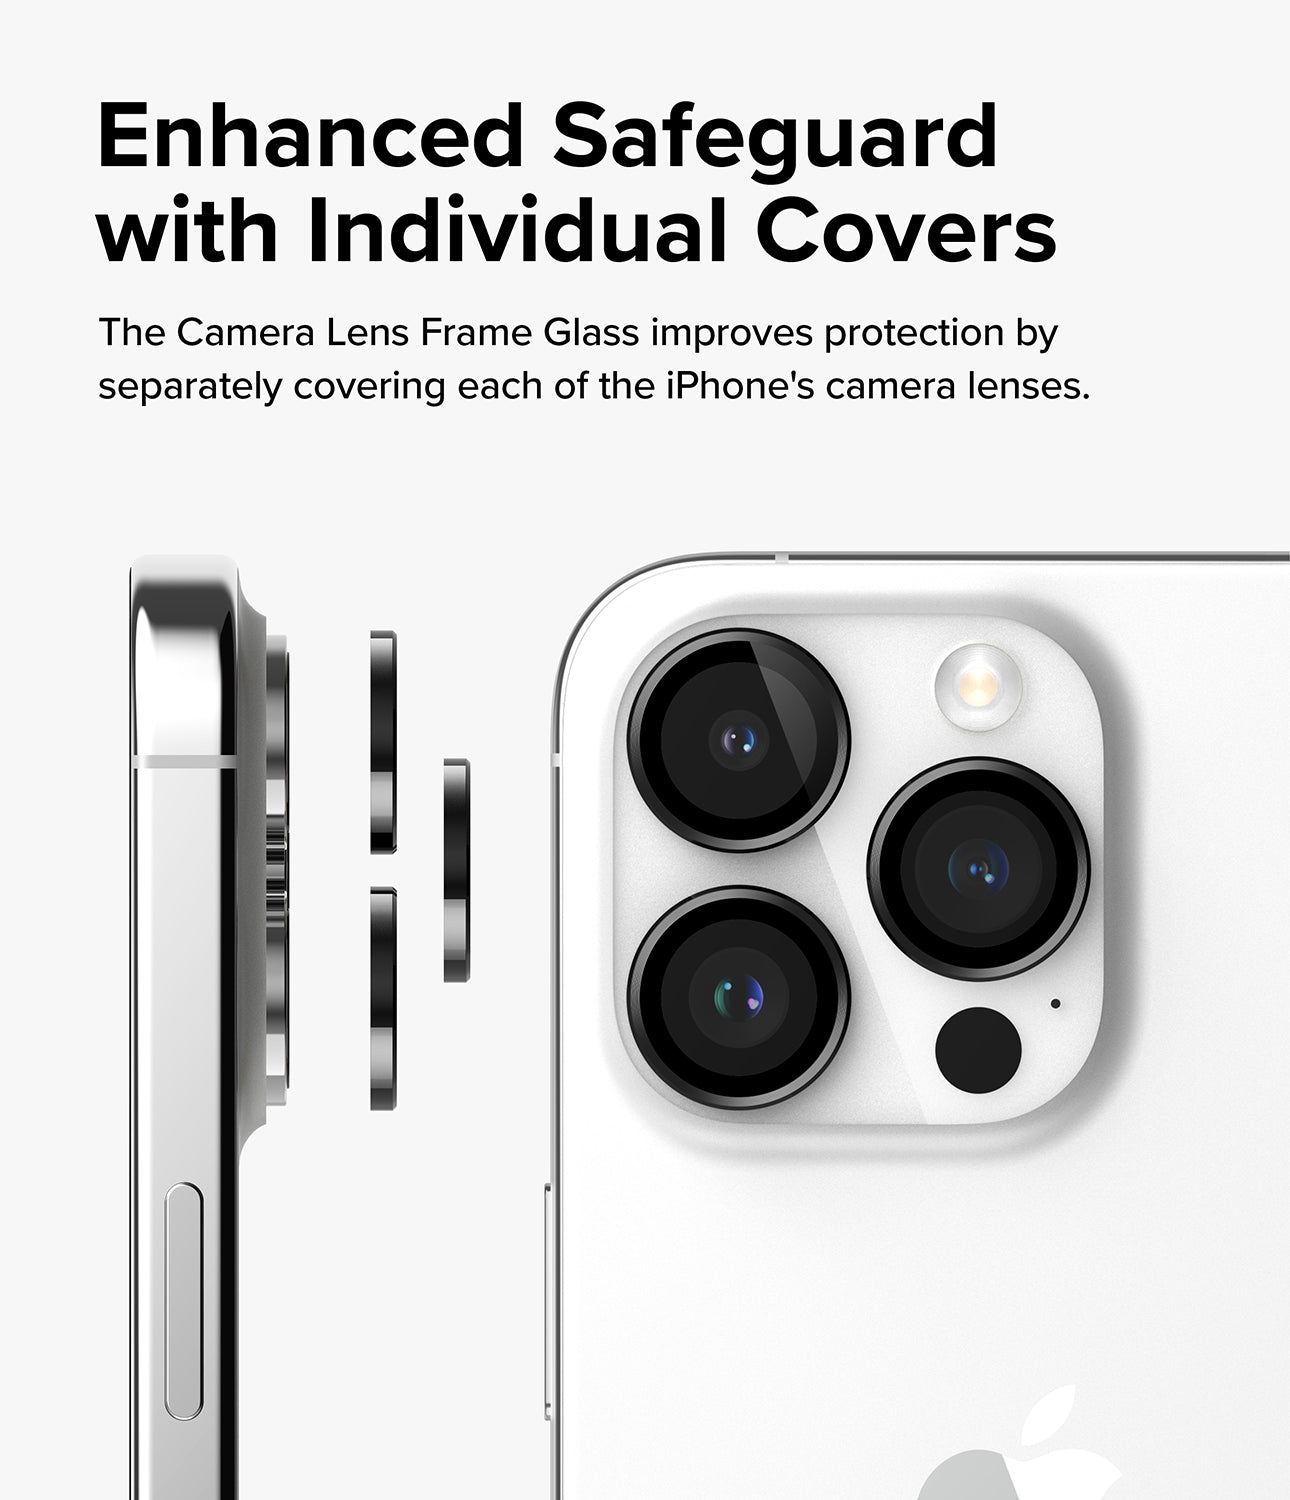 iPhone 15 Pro Max | Camera Lens Frame Glass - Enhanced Safeguard with Individual Covers. The Camera Lens Frame Glass improves protection by separately covering each of the iPhone's camera lenses.